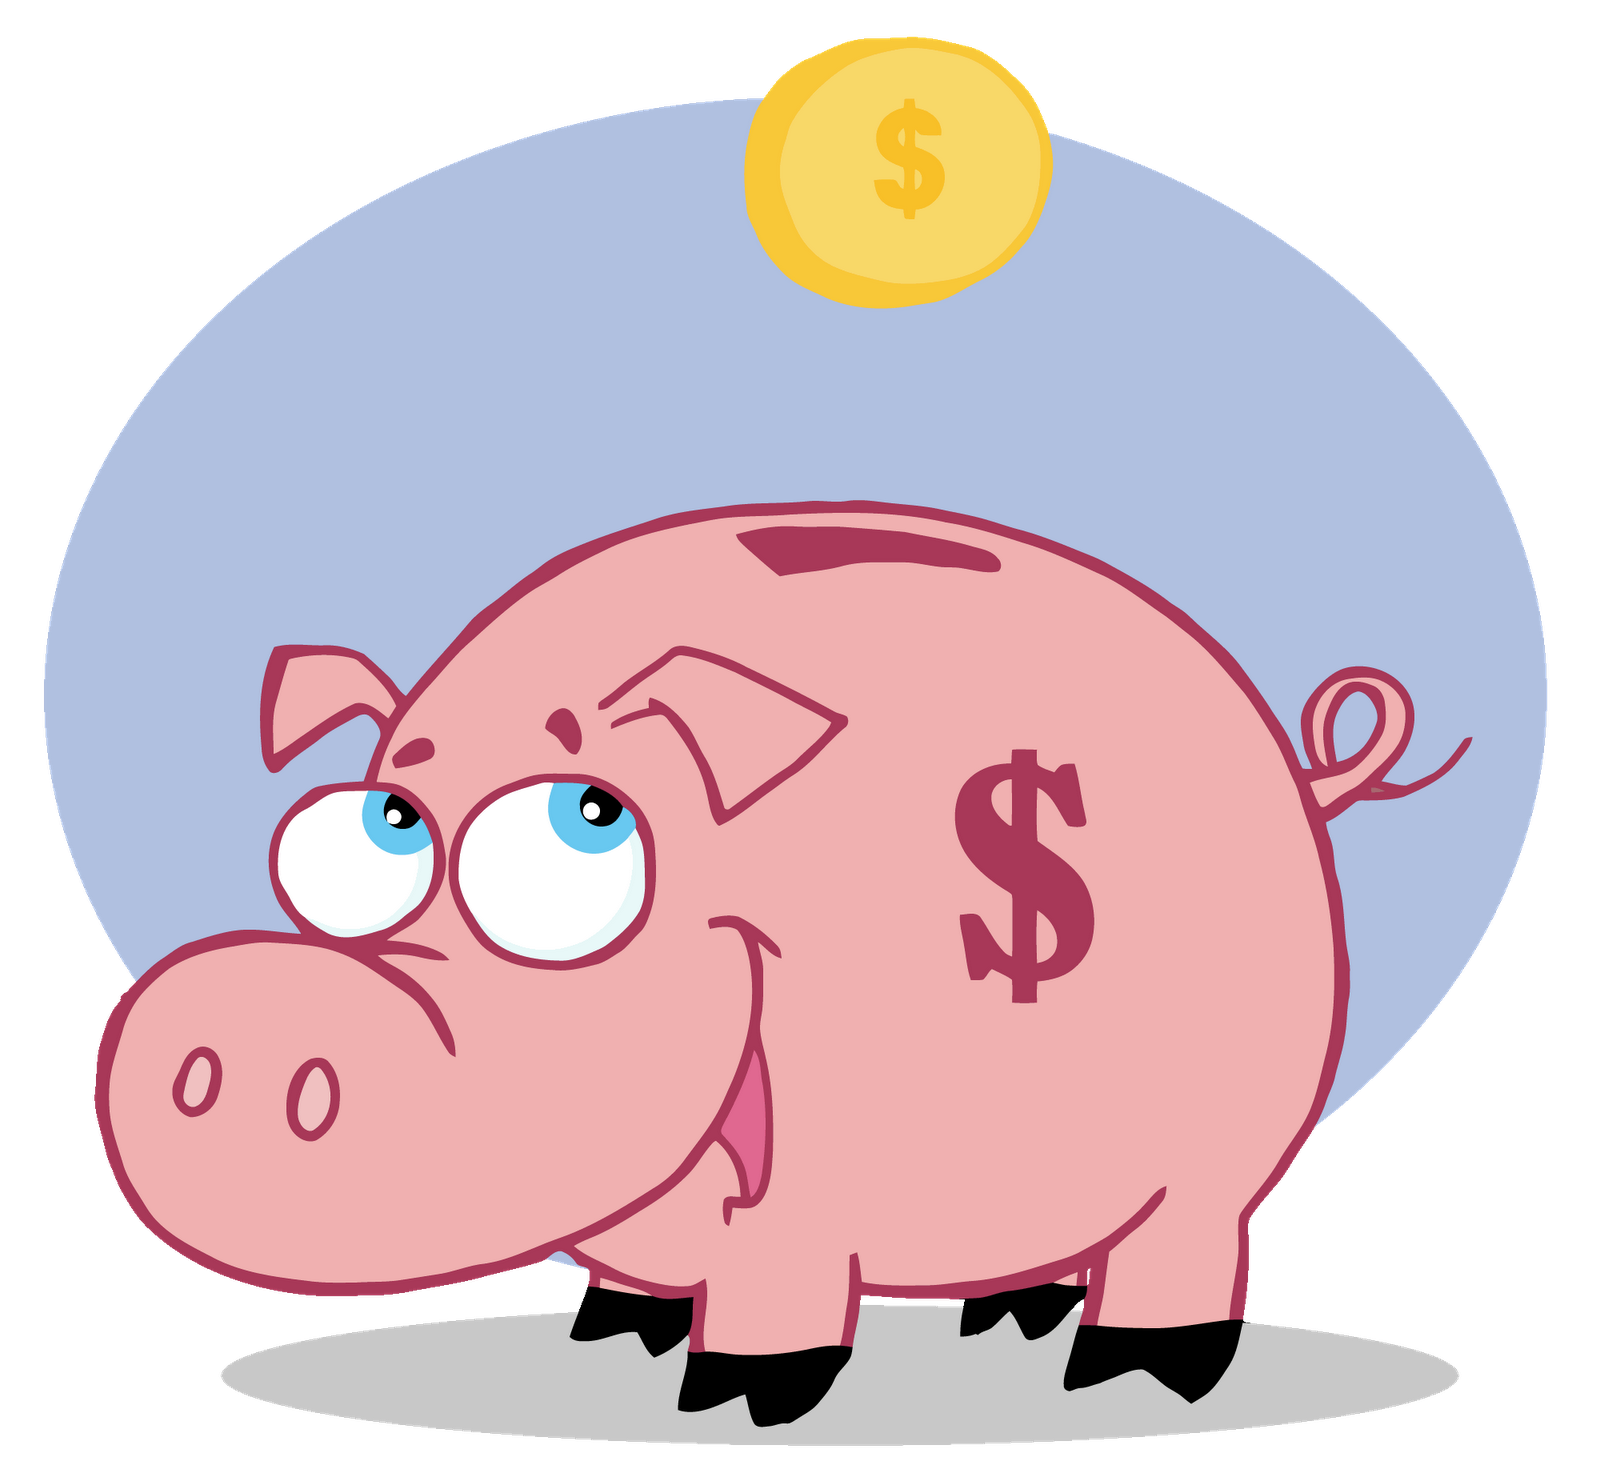 What s happening in. Fundraiser clipart piggy bank